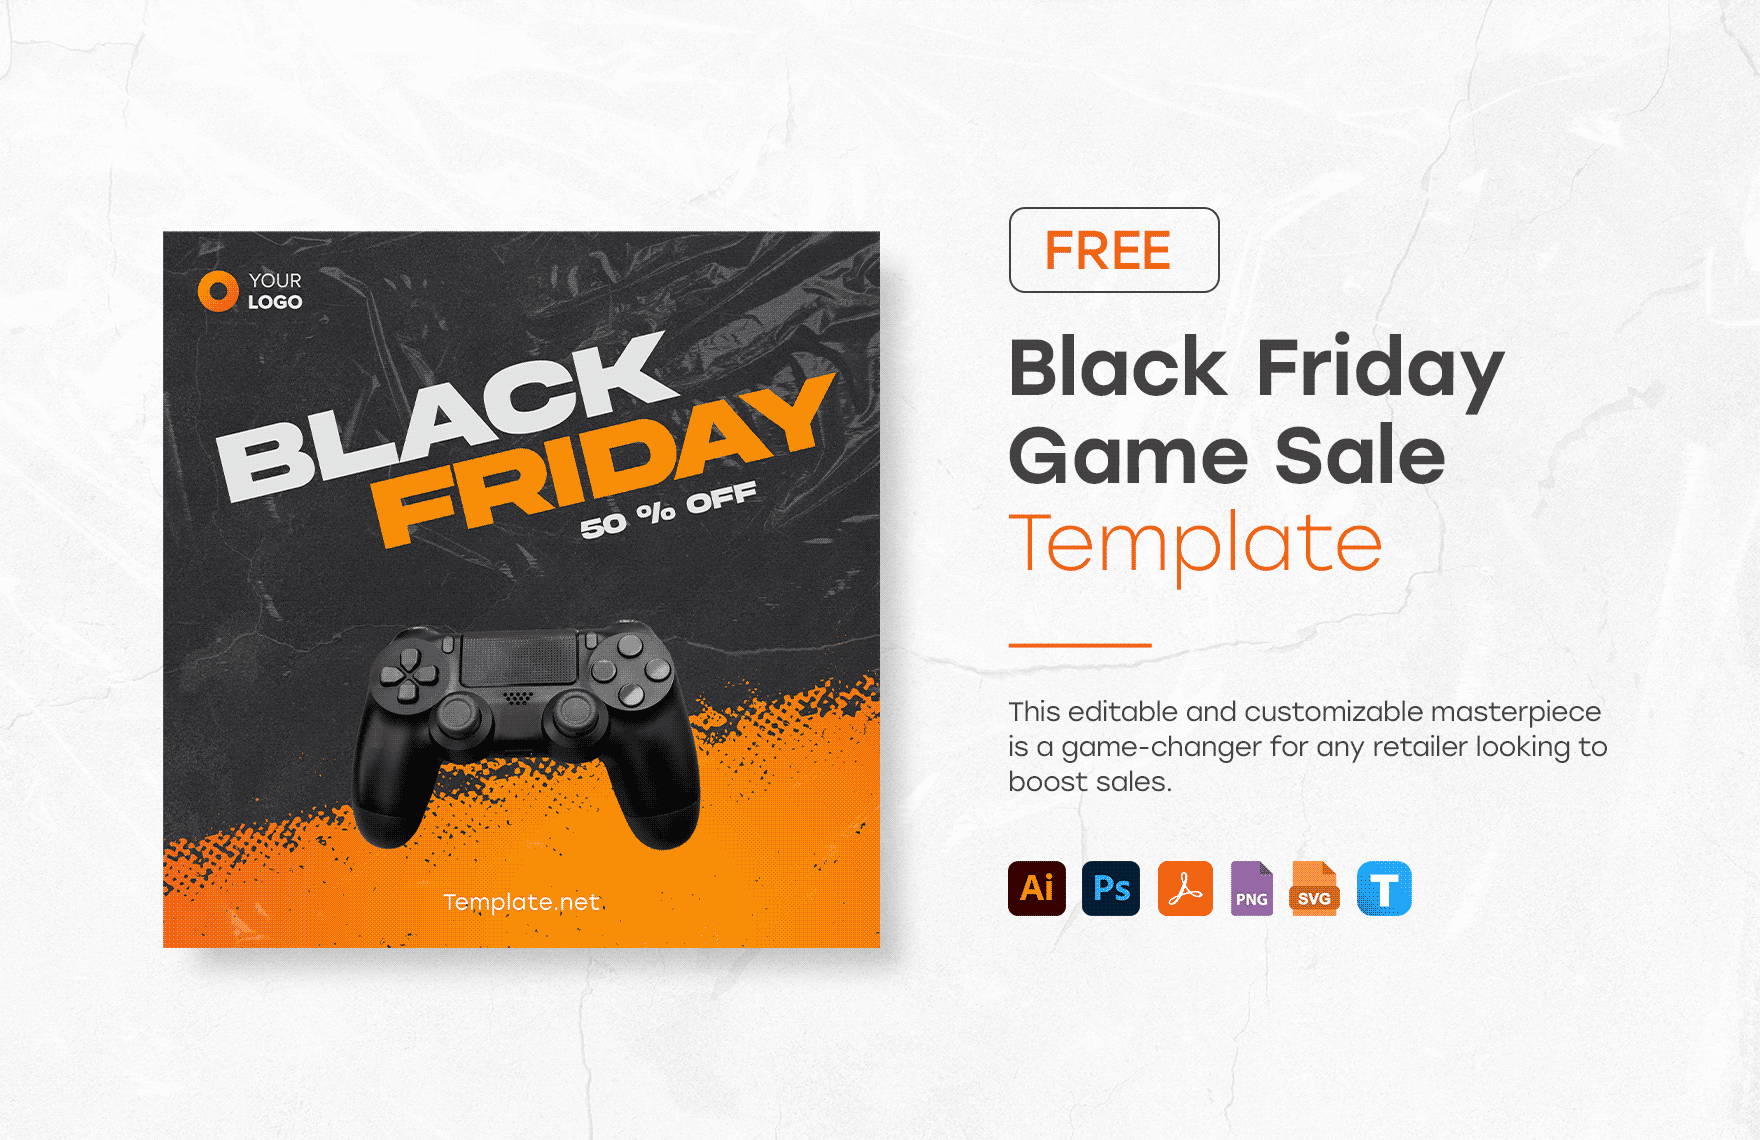 Black Friday Game Sale Template